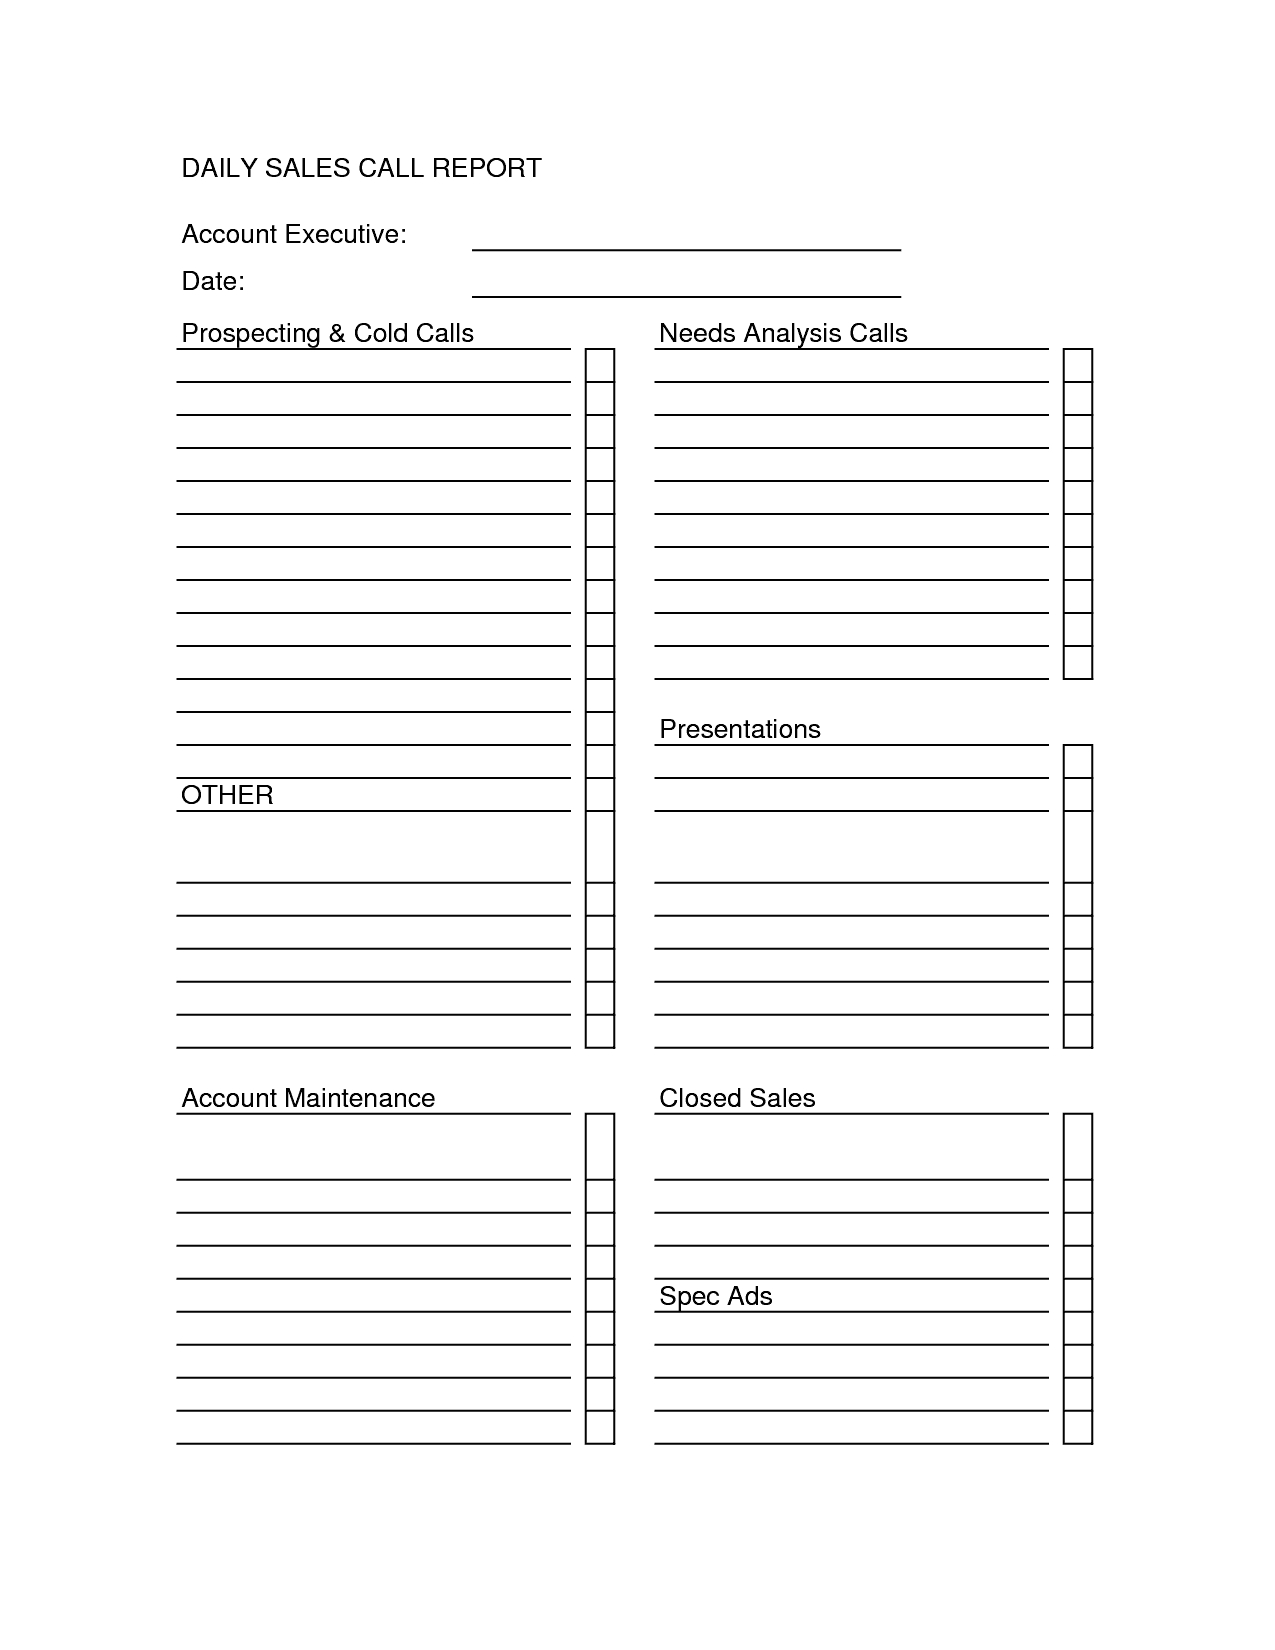 Sales Call Report Templates - Word Excel Fomats Intended For Sales Call Report Template Free